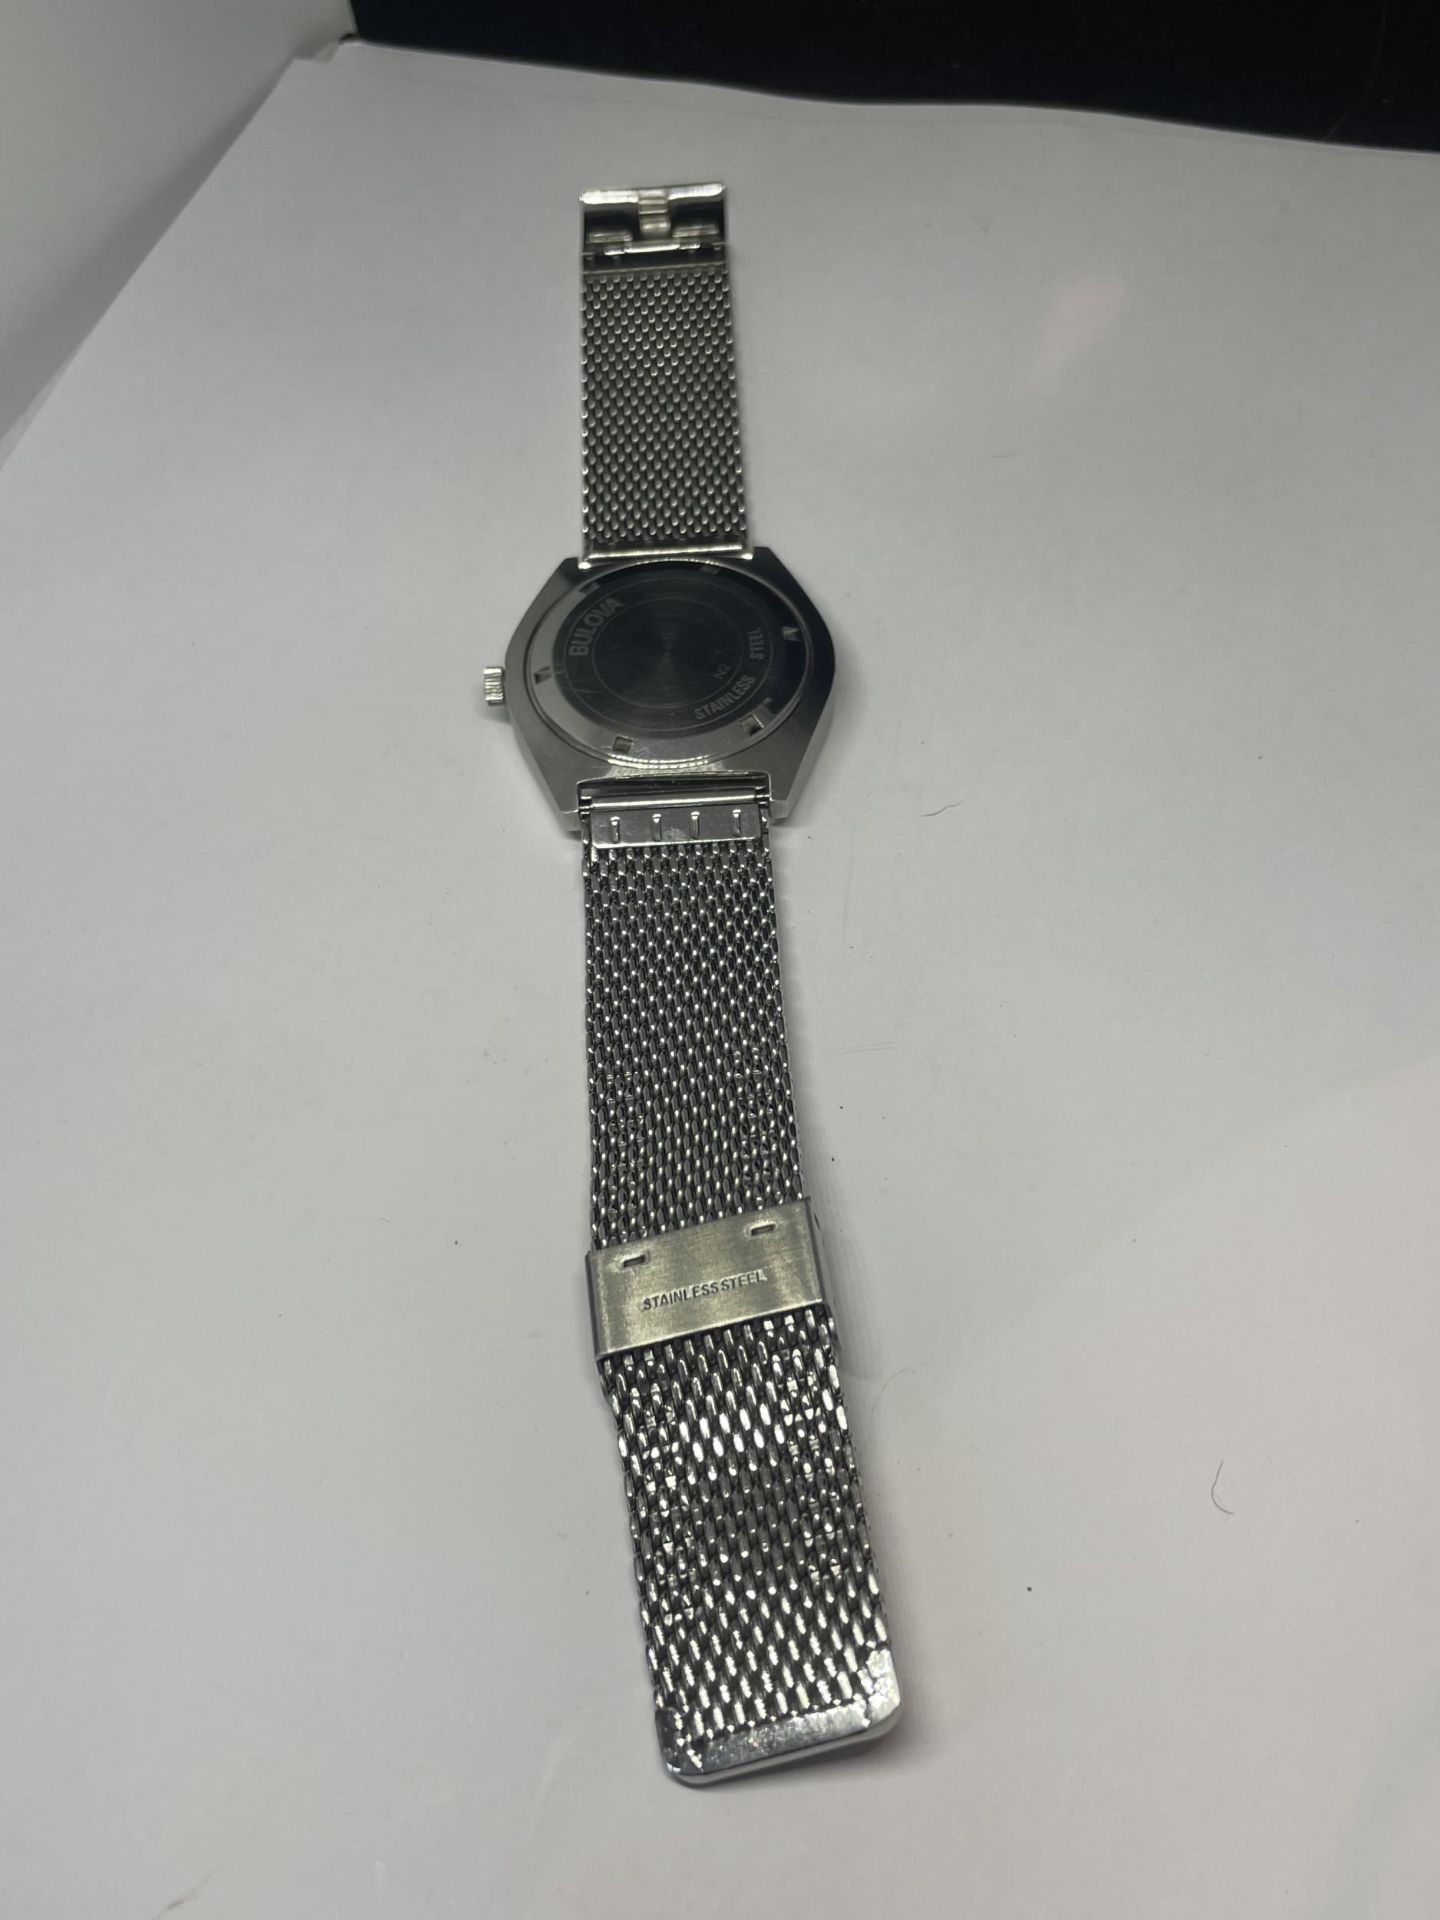 A RARE VINTAGE BULOVA AUTOMATIC GENTS N2 WRIST WATCH, SEEN WORKING BUT NO WARRANTIES GIVEN - Image 4 of 4